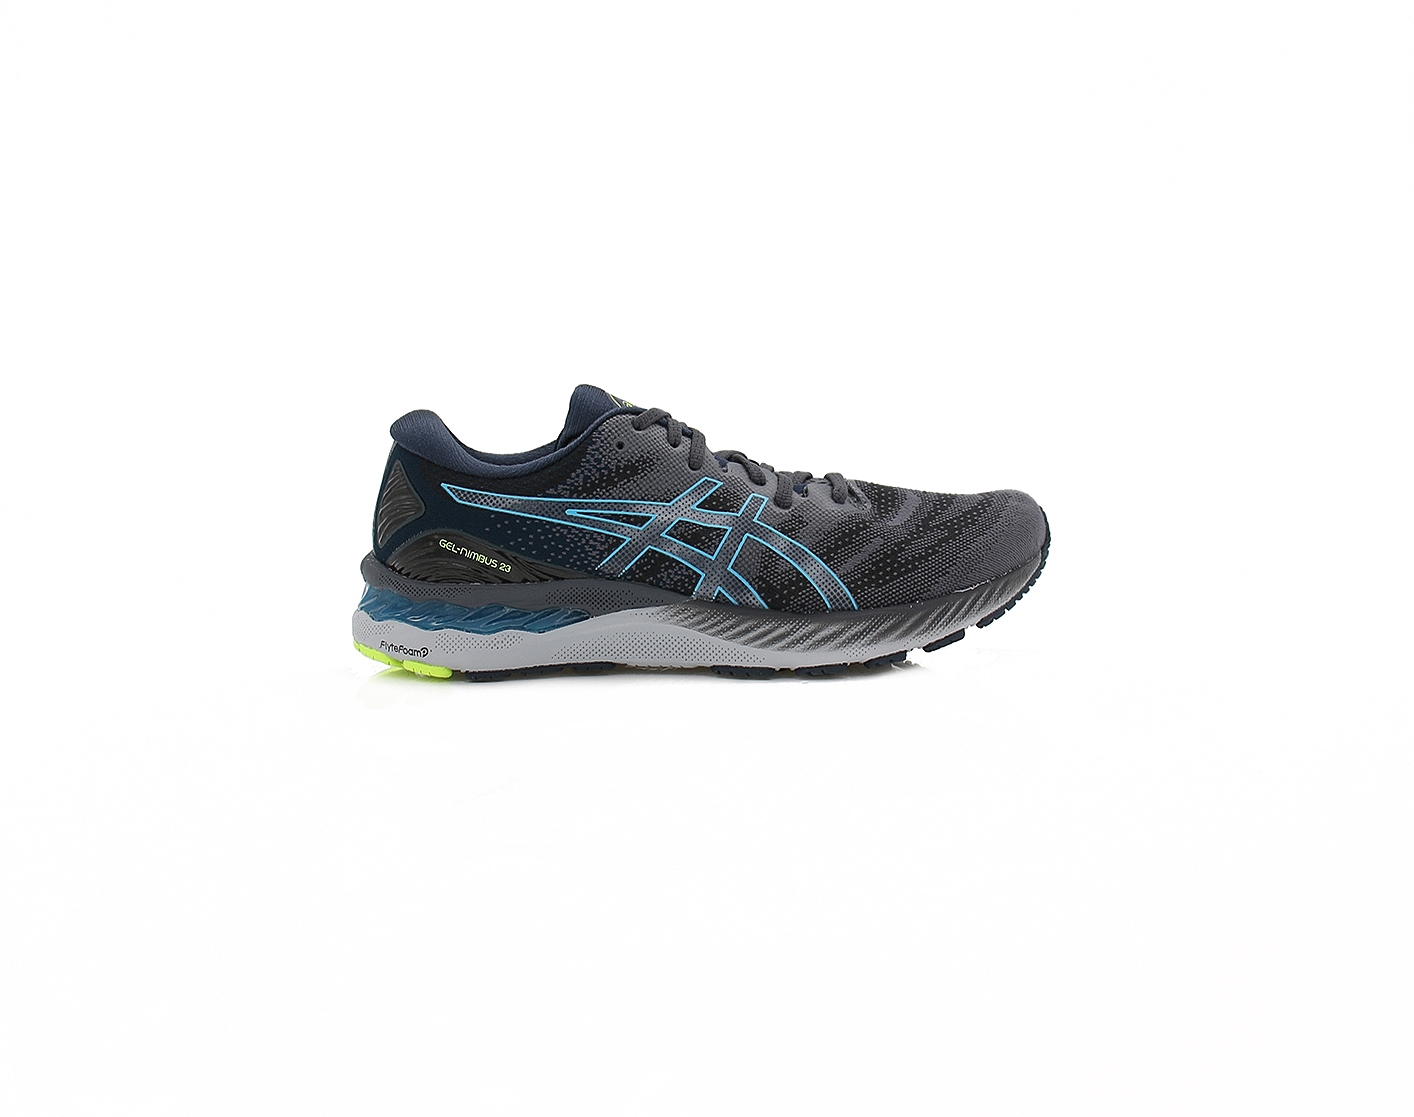 Mens Asics Gel Nimbus 23 – Dark Running Trainers – Suitable For Achilles Pain / Orthotics – Size 10.5 – Black / Blue / Grey – Synthetic Fabric